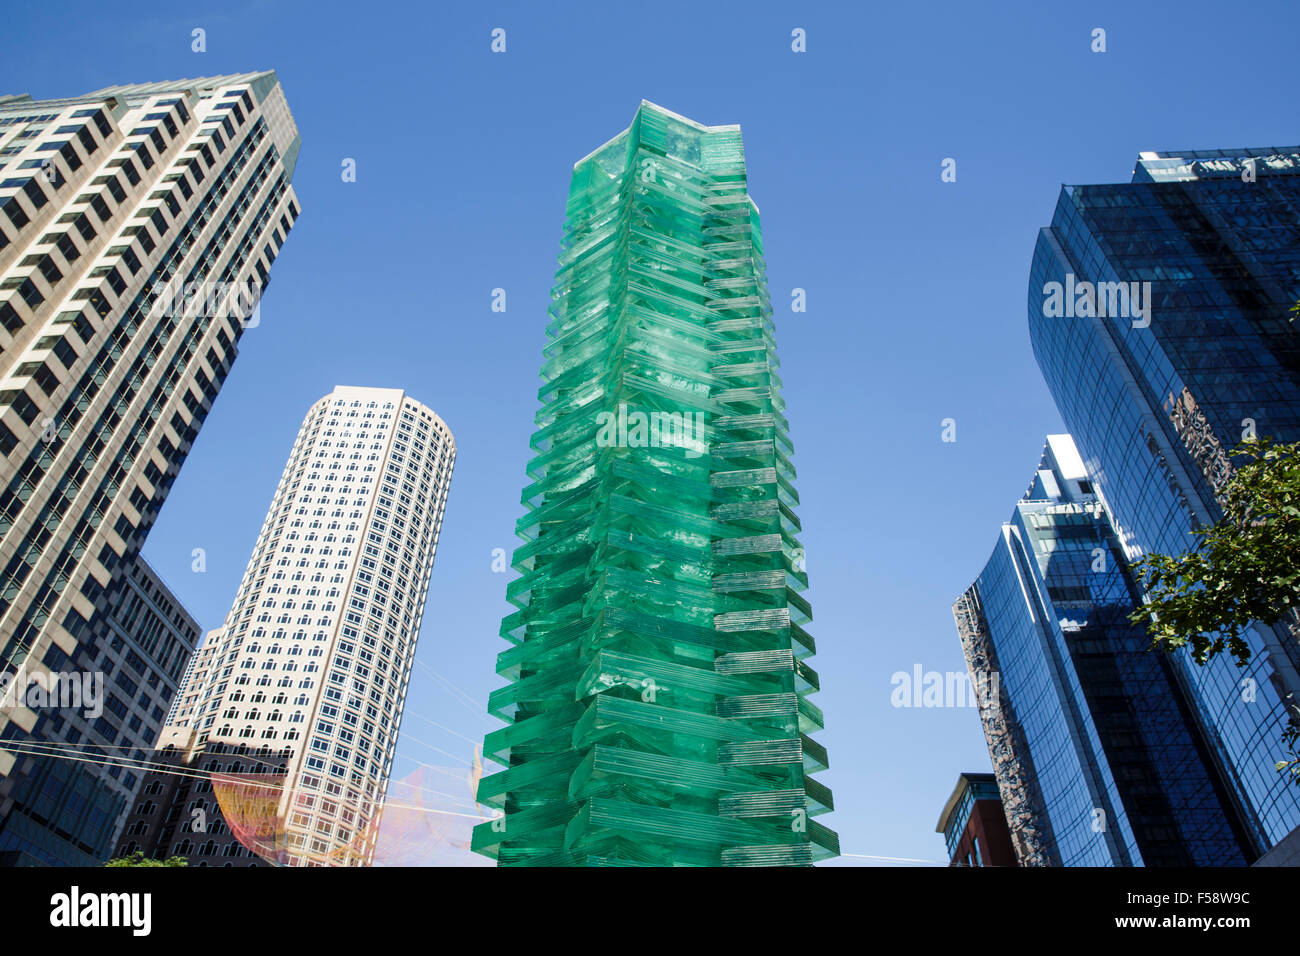 Tectonics of Transparency: The Tower by Cristina Parreno Architecture on display in Boston as part of the Design Biennial. Stock Photo